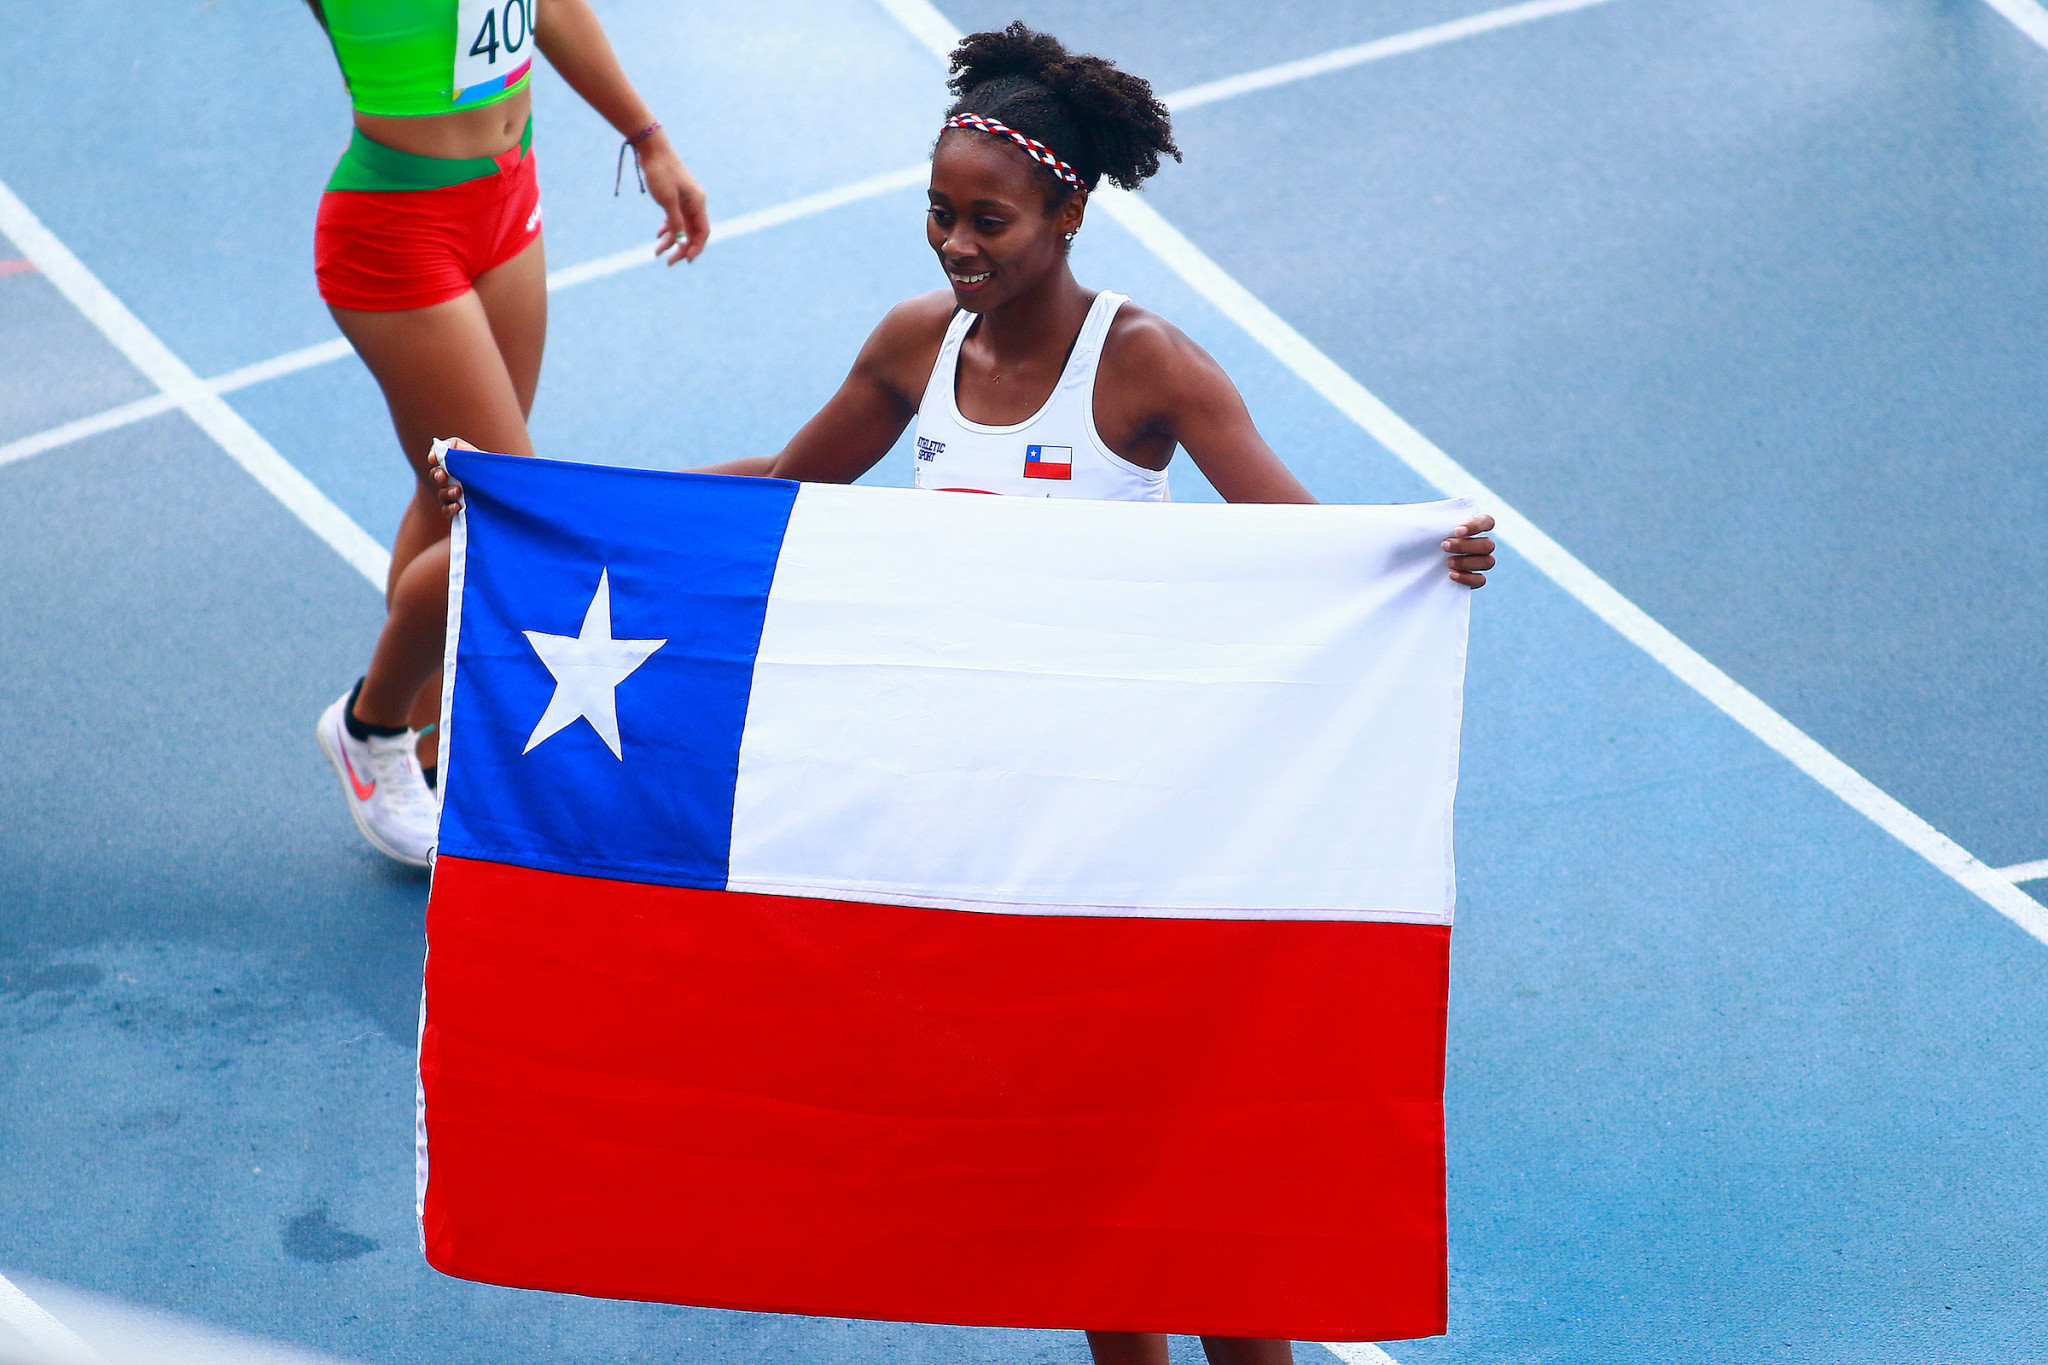 Chilean Berdine Castillo claimed silver in the women's 800m while Daily Cooper of Cuba crossed the line in 1min 28.62sec to secure the gold ©Agencia.Xpress Media